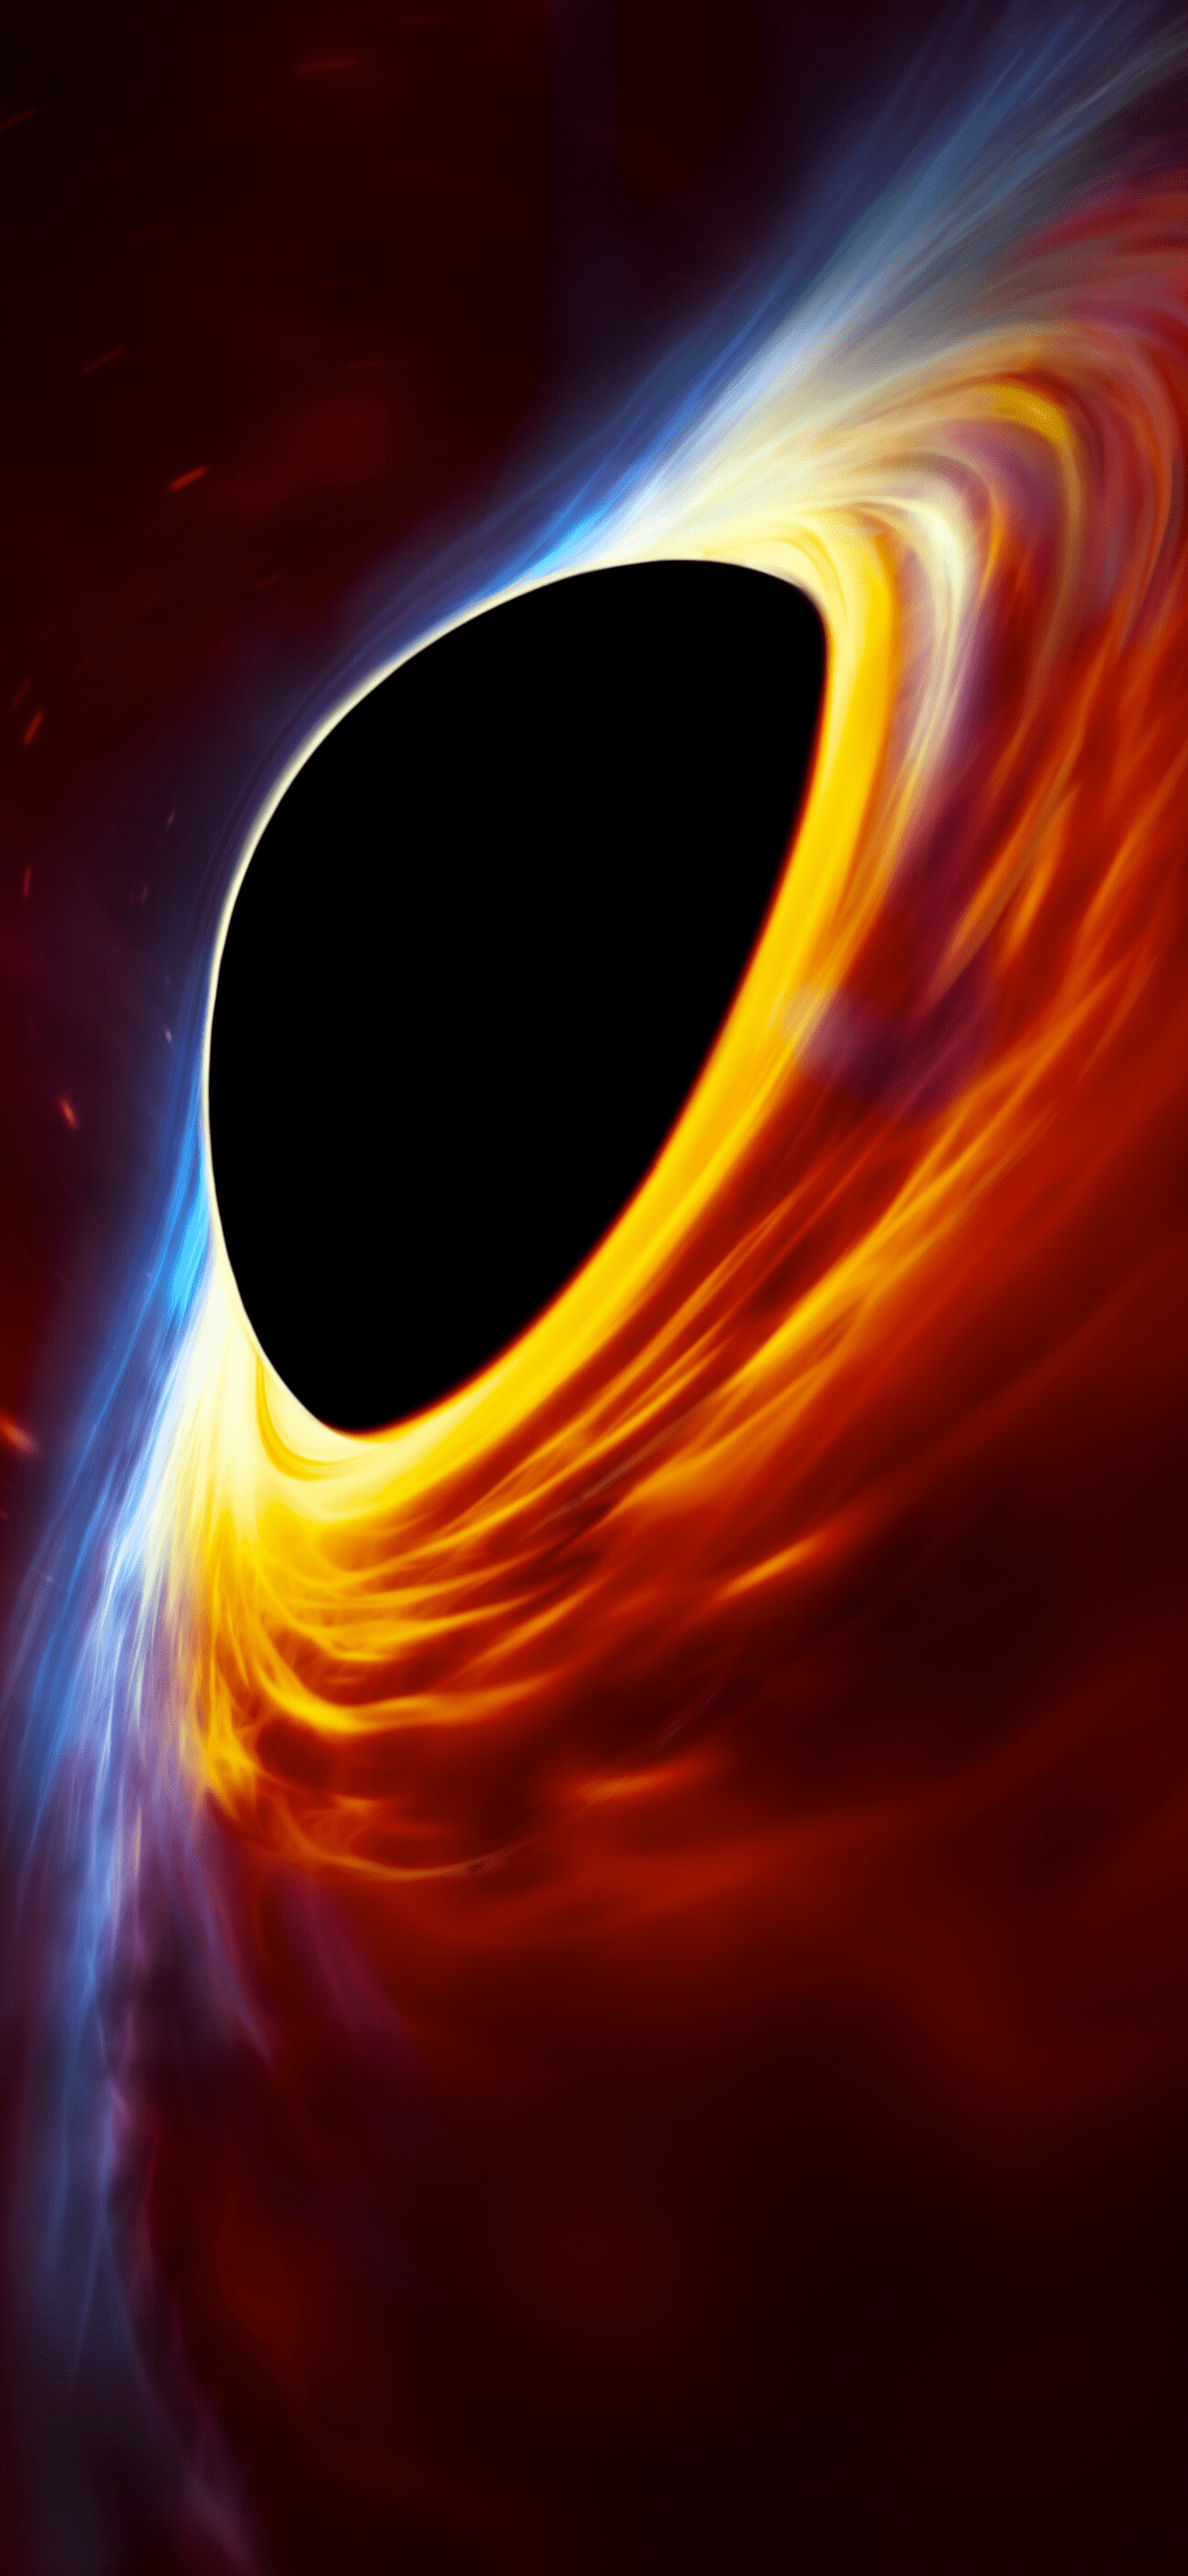 Black Hole: Spheroidal regions of space from which nothing can escape. 1310x2820 HD Wallpaper.